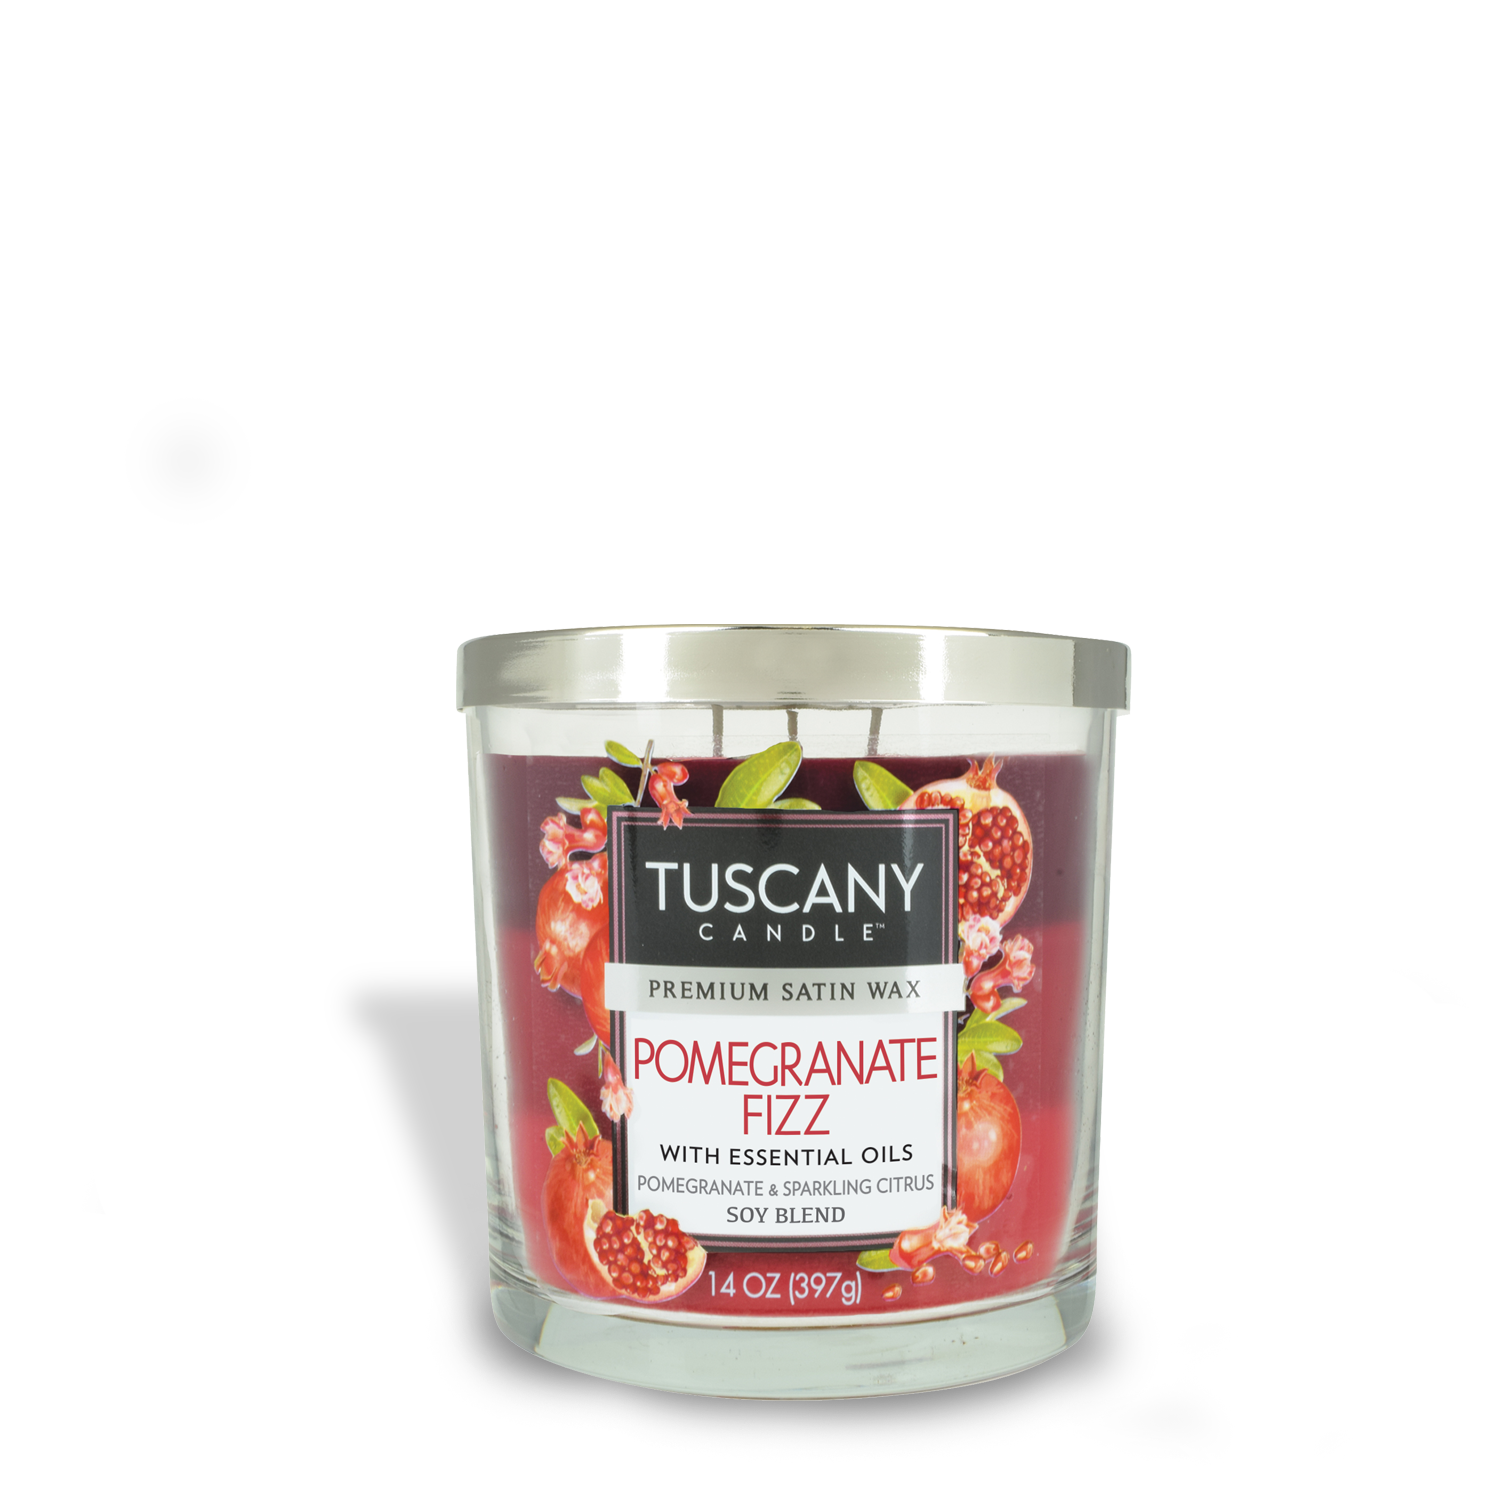 Fragrant Pomegranate Fizz Long-Lasting Scented Jar Candle (14 oz) from Tuscany Candle.